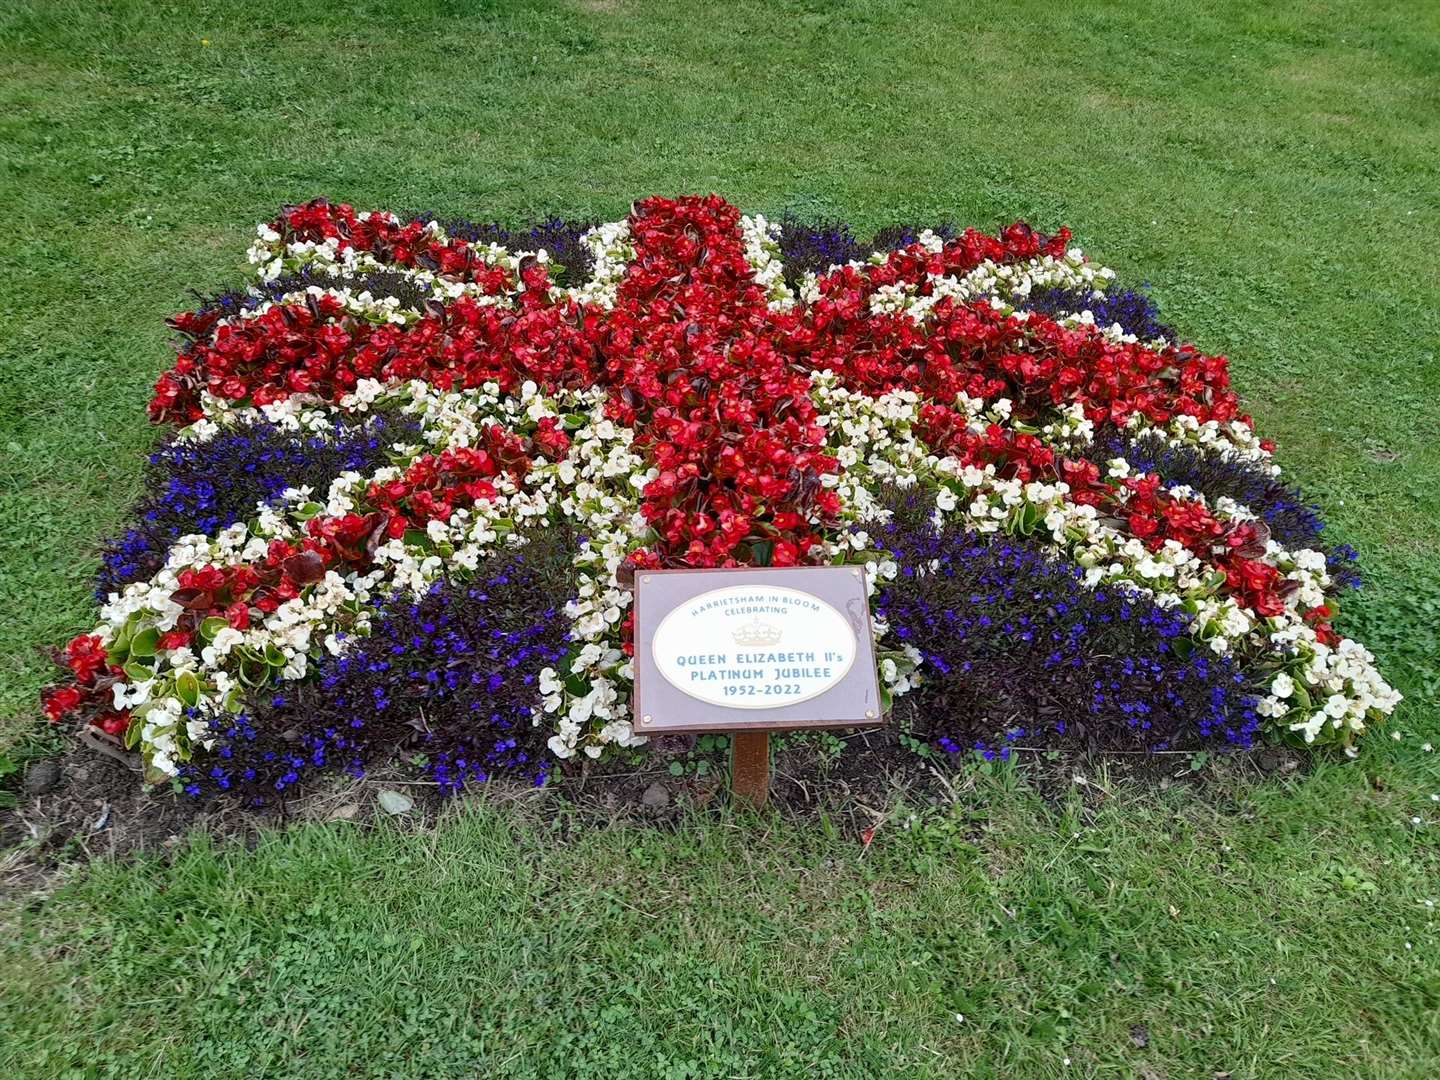 The Platinum Jubilee display in Harrietsham - one of many to celebrate the occasion in June